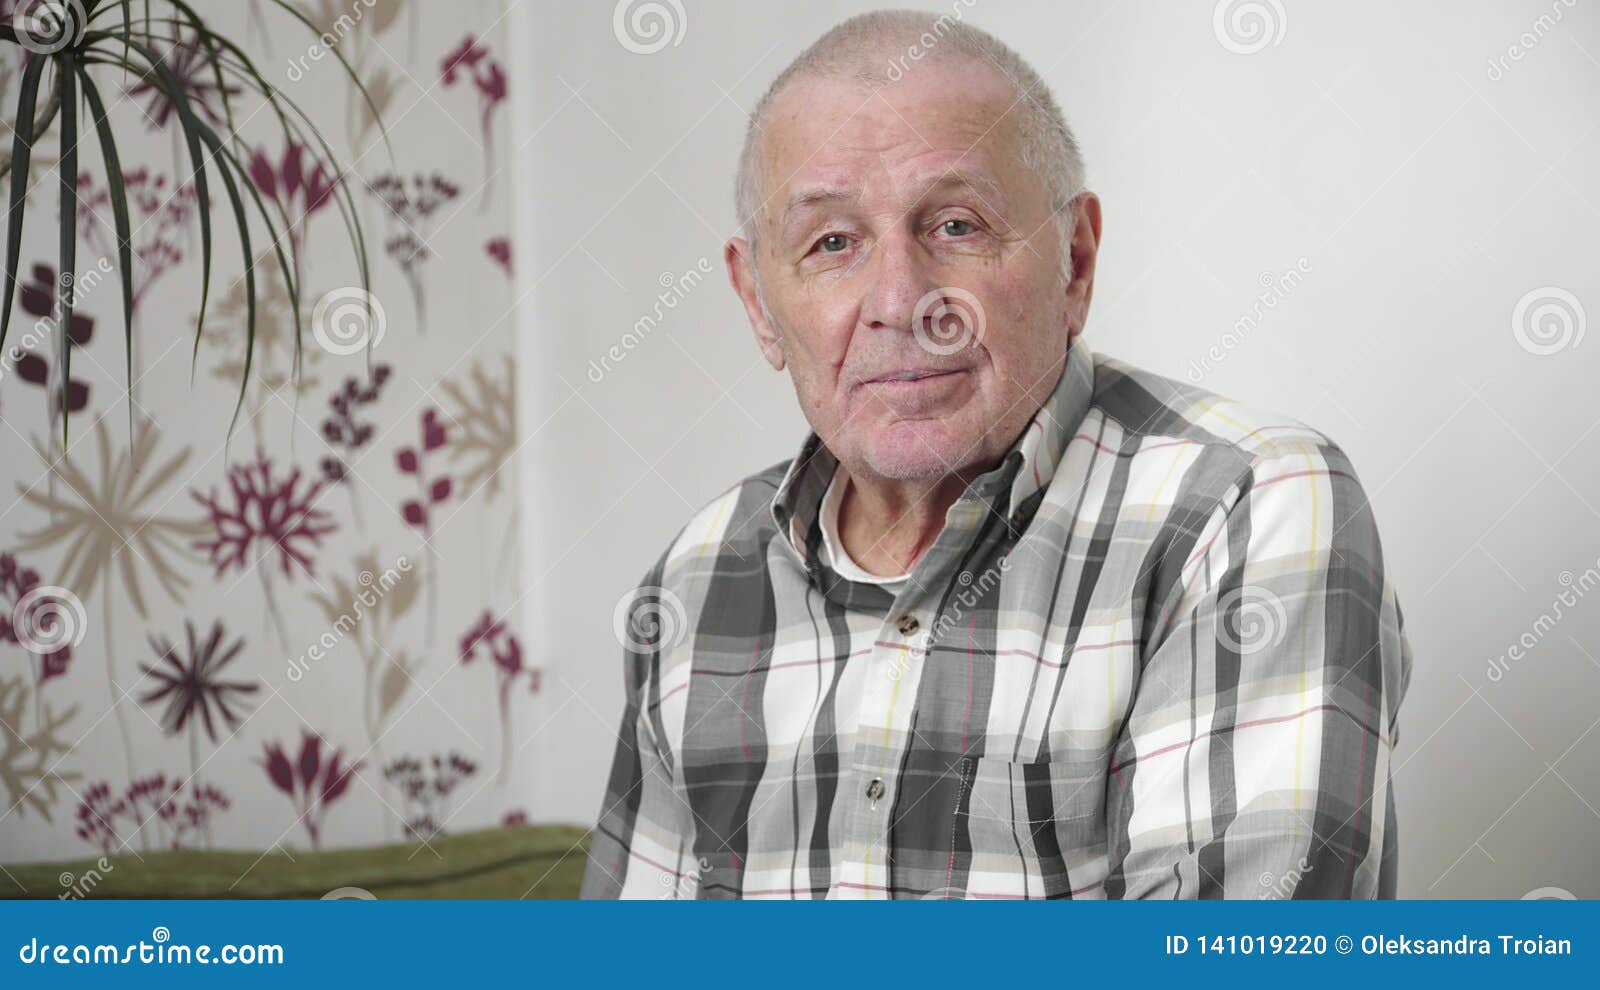 very old man portrait in thoughts home looking at camera 4k